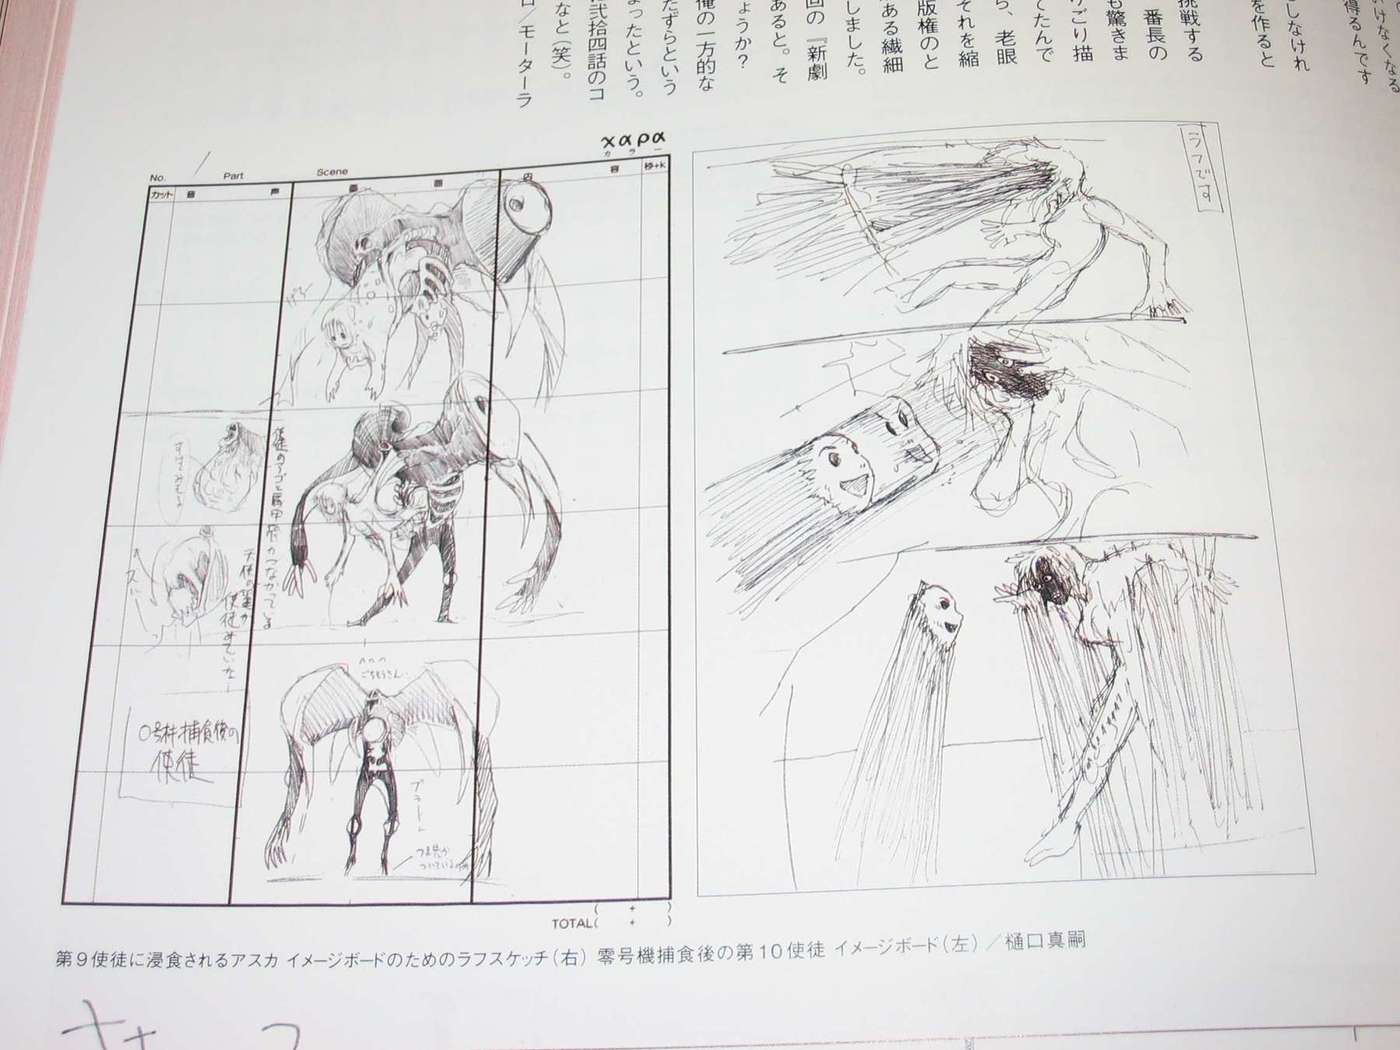 Storyboard: Asuka’s face being ripped off while being mentally assaulted by an Angel (4)